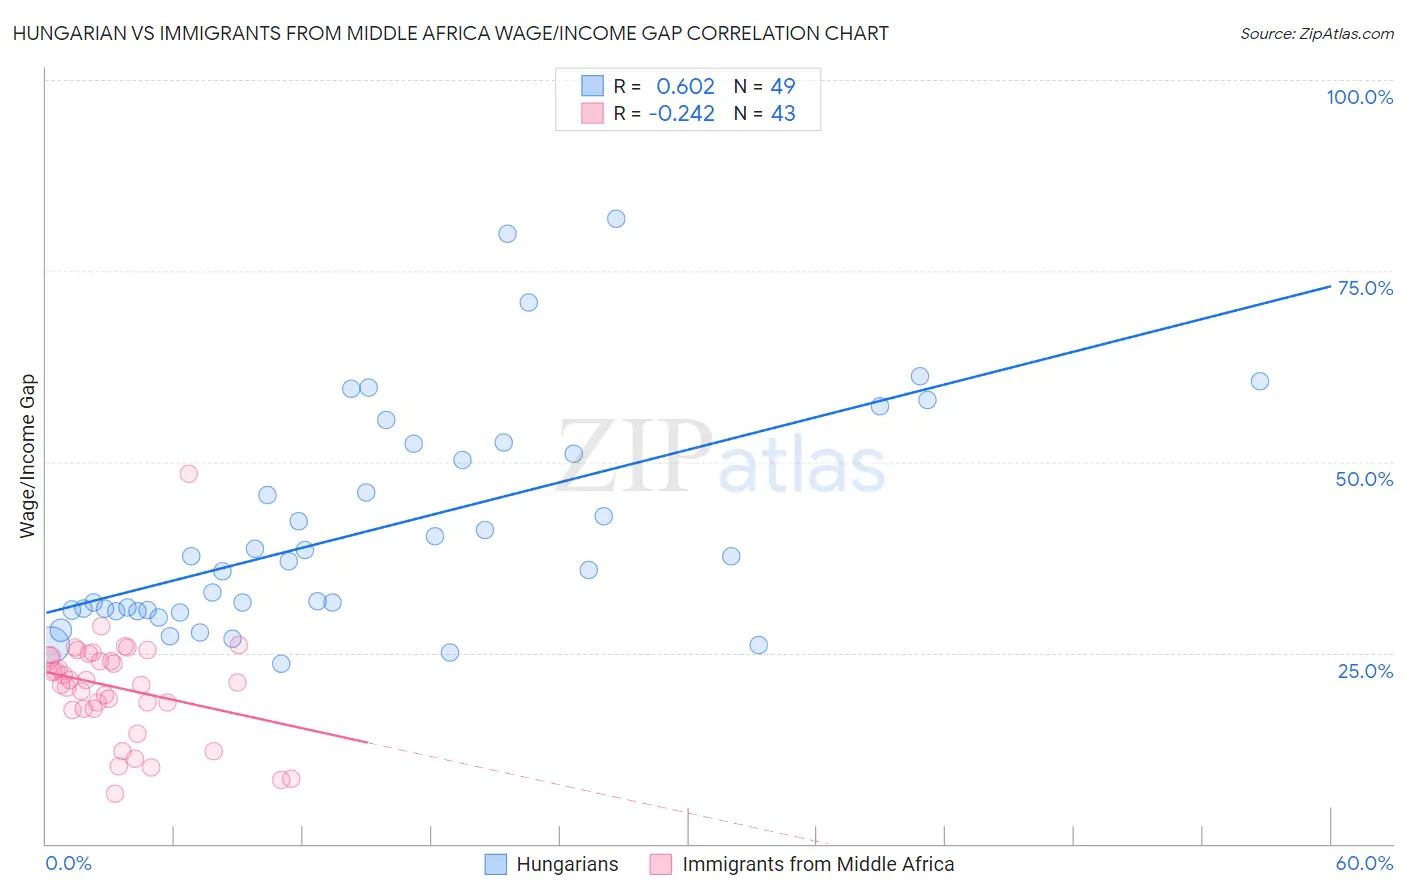 Hungarian vs Immigrants from Middle Africa Wage/Income Gap